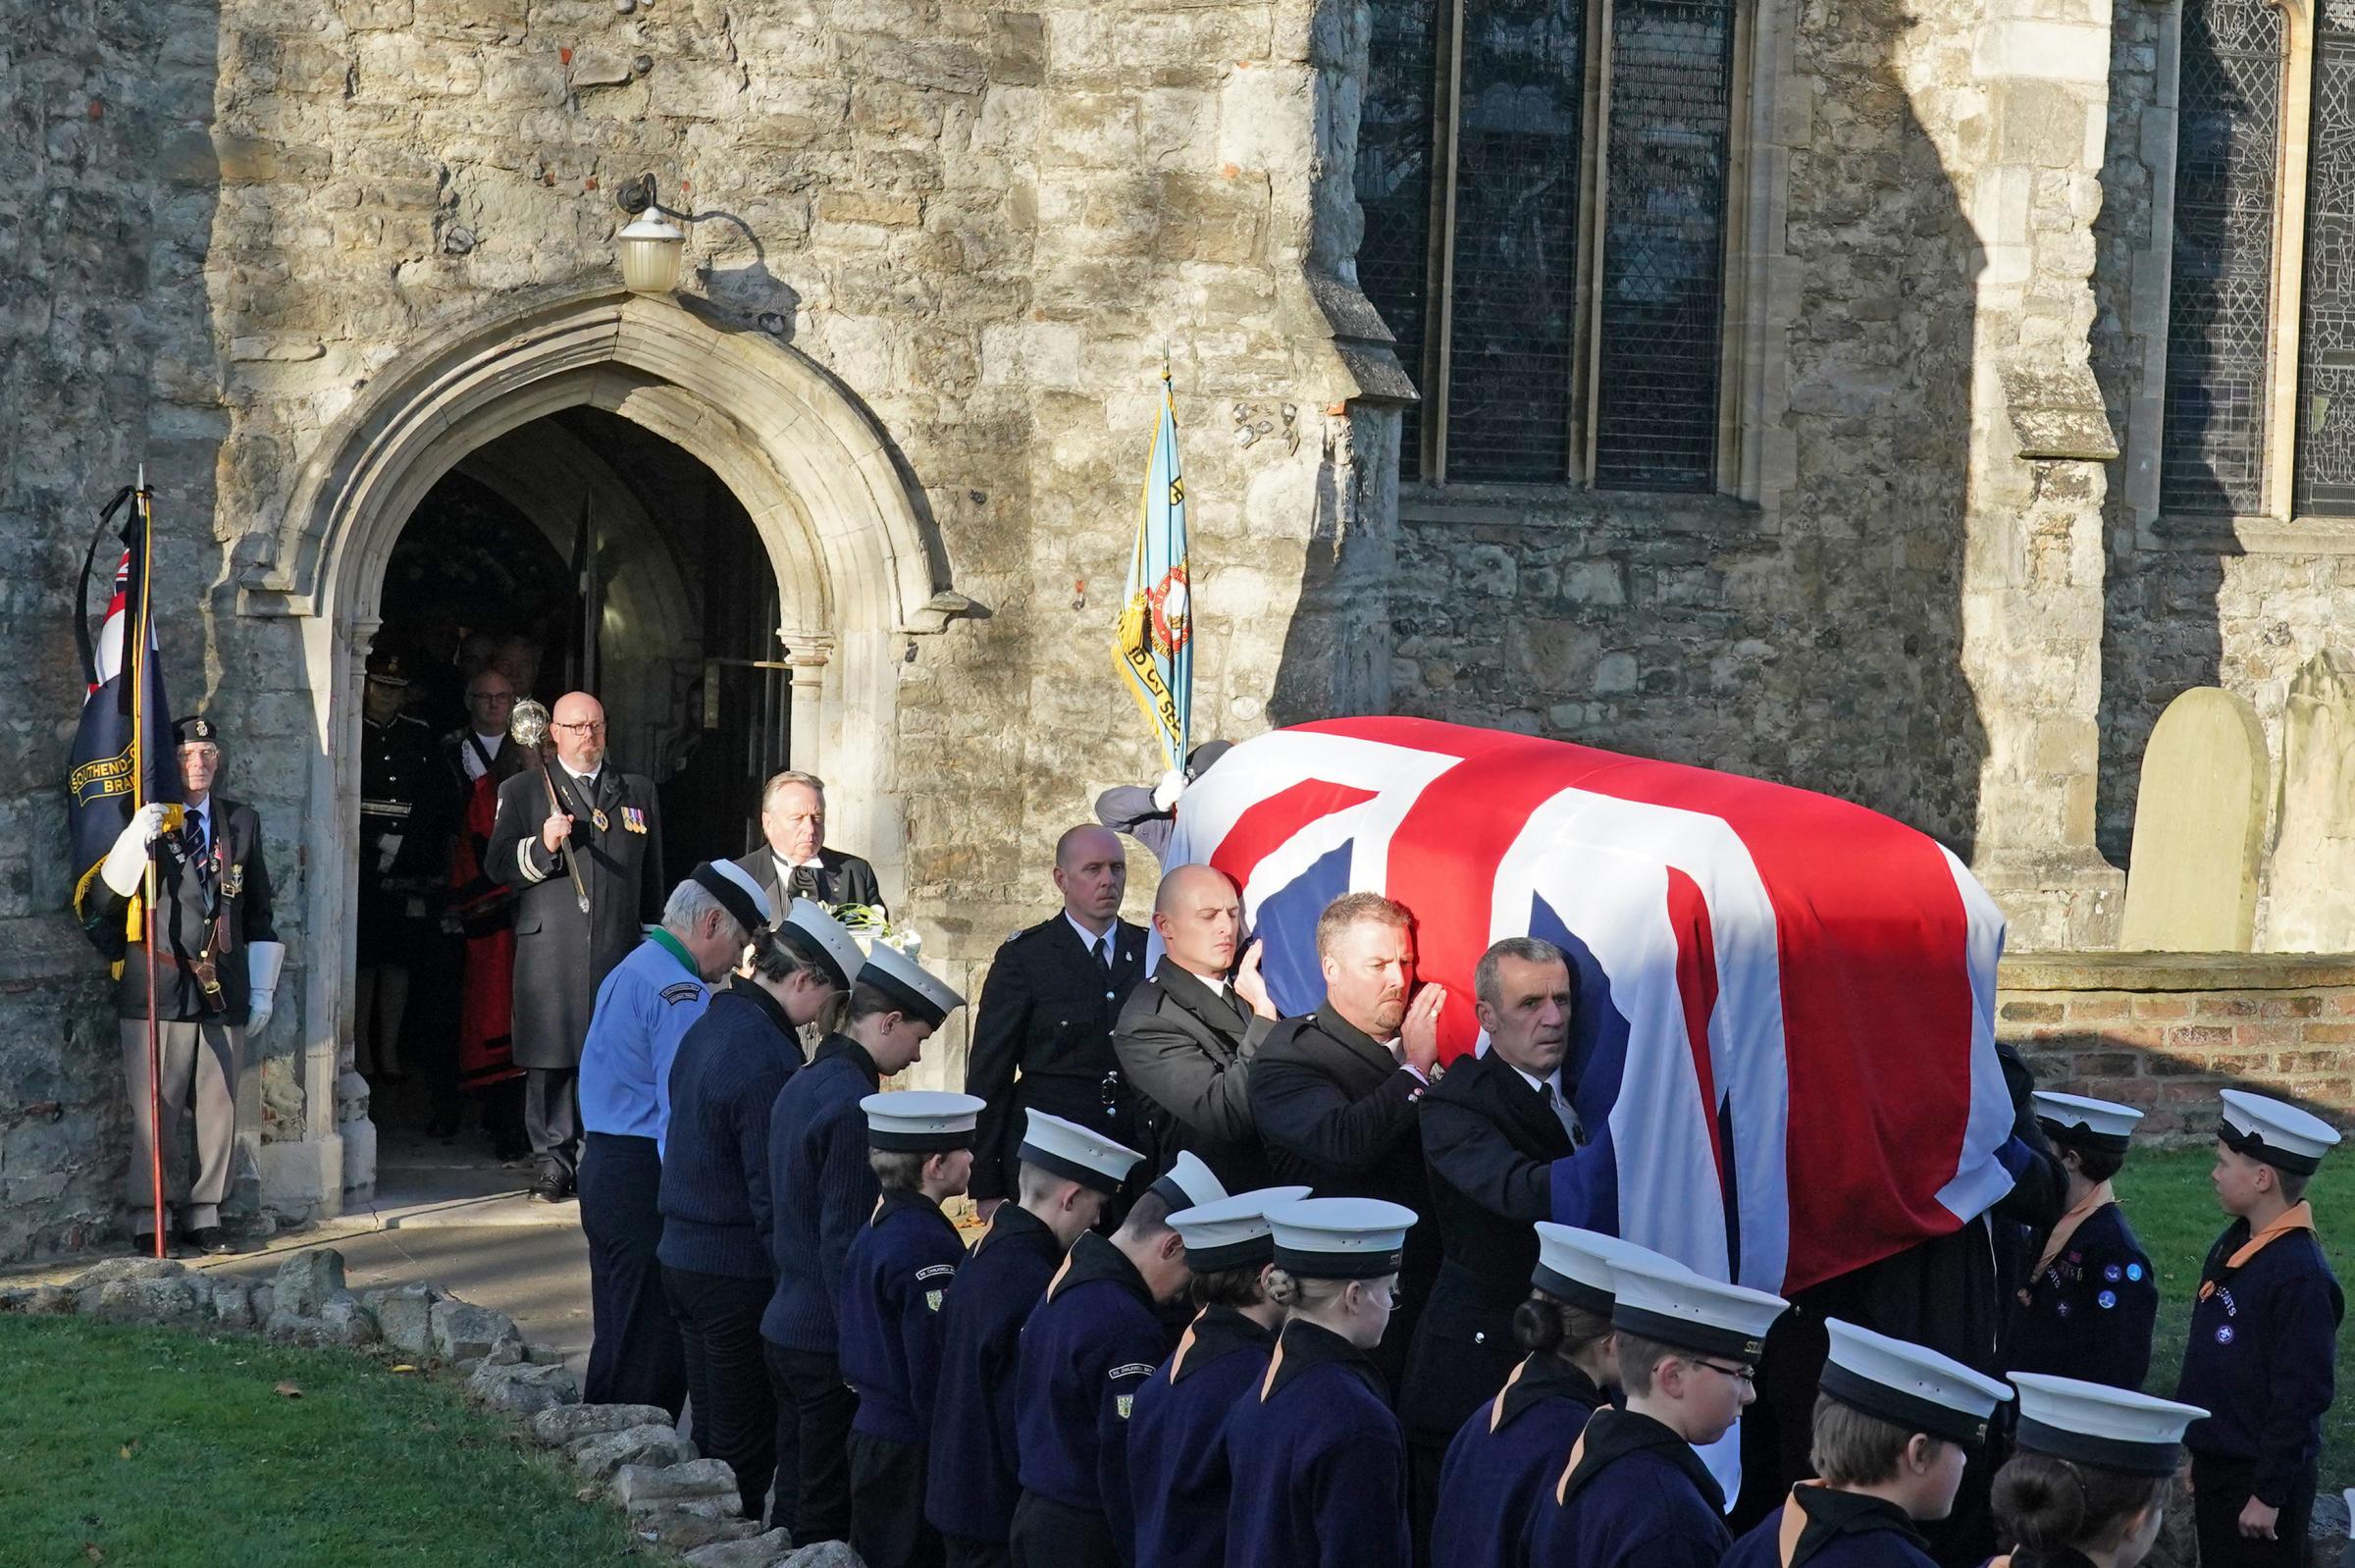 Pall bearers carry the coffin of Sir David Amess out of St Marys Church in Prittlewell, Southend, following his funeral service. Picture date: Monday November 22, 2021. PA Photo. Southend West MP Sir David was killed during a constituency surgery in